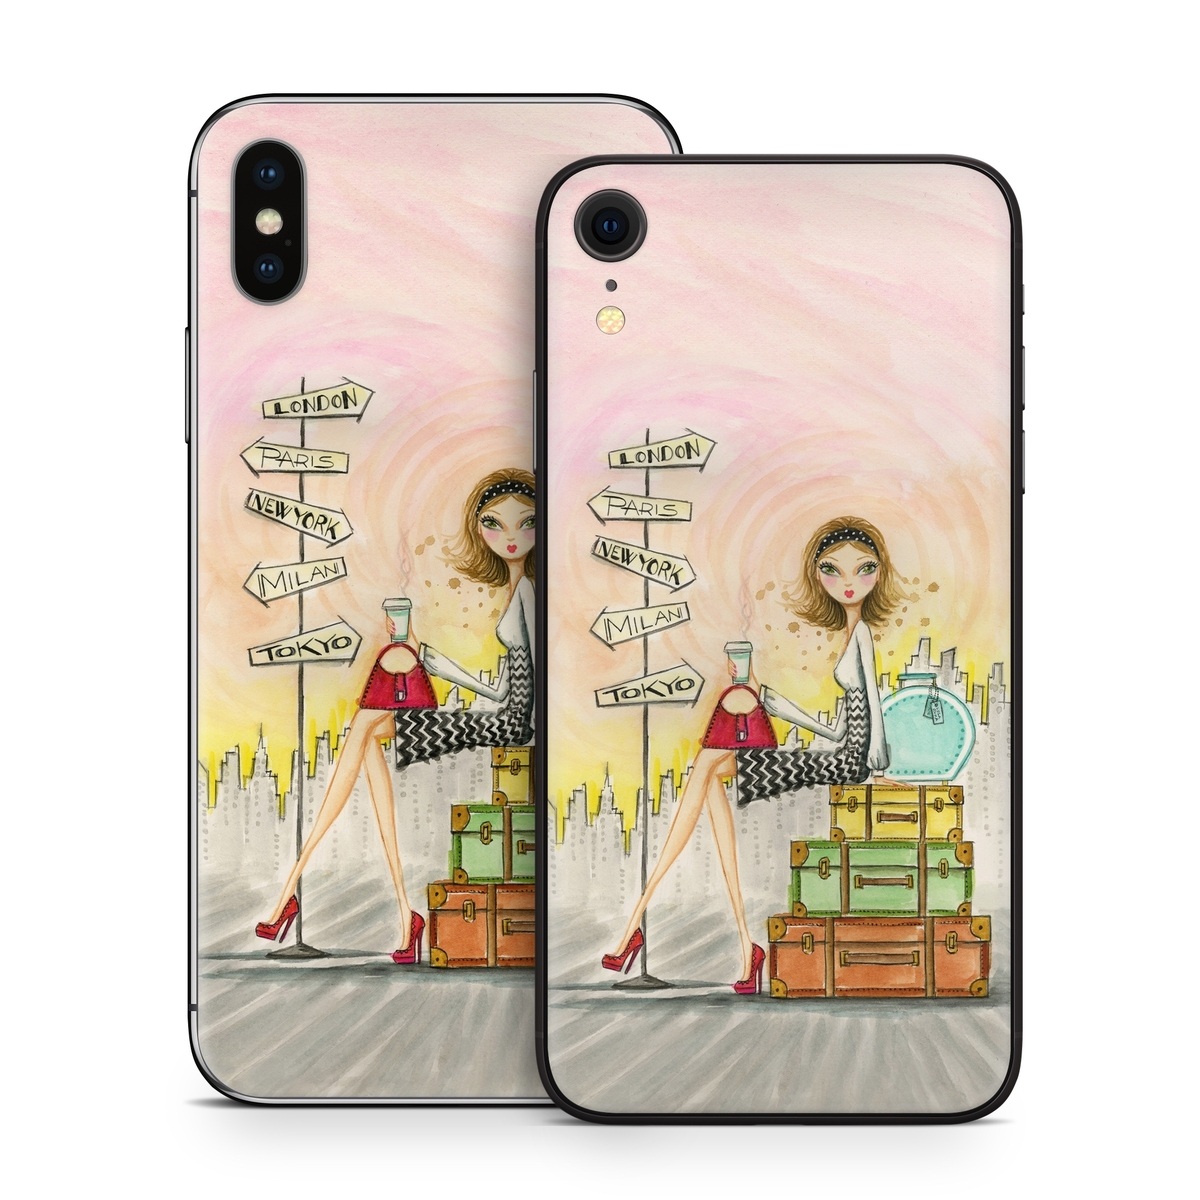 iPhone XS Skin design of Cartoon, Illustration, Art, Watercolor paint with gray, pink, green, red, black colors